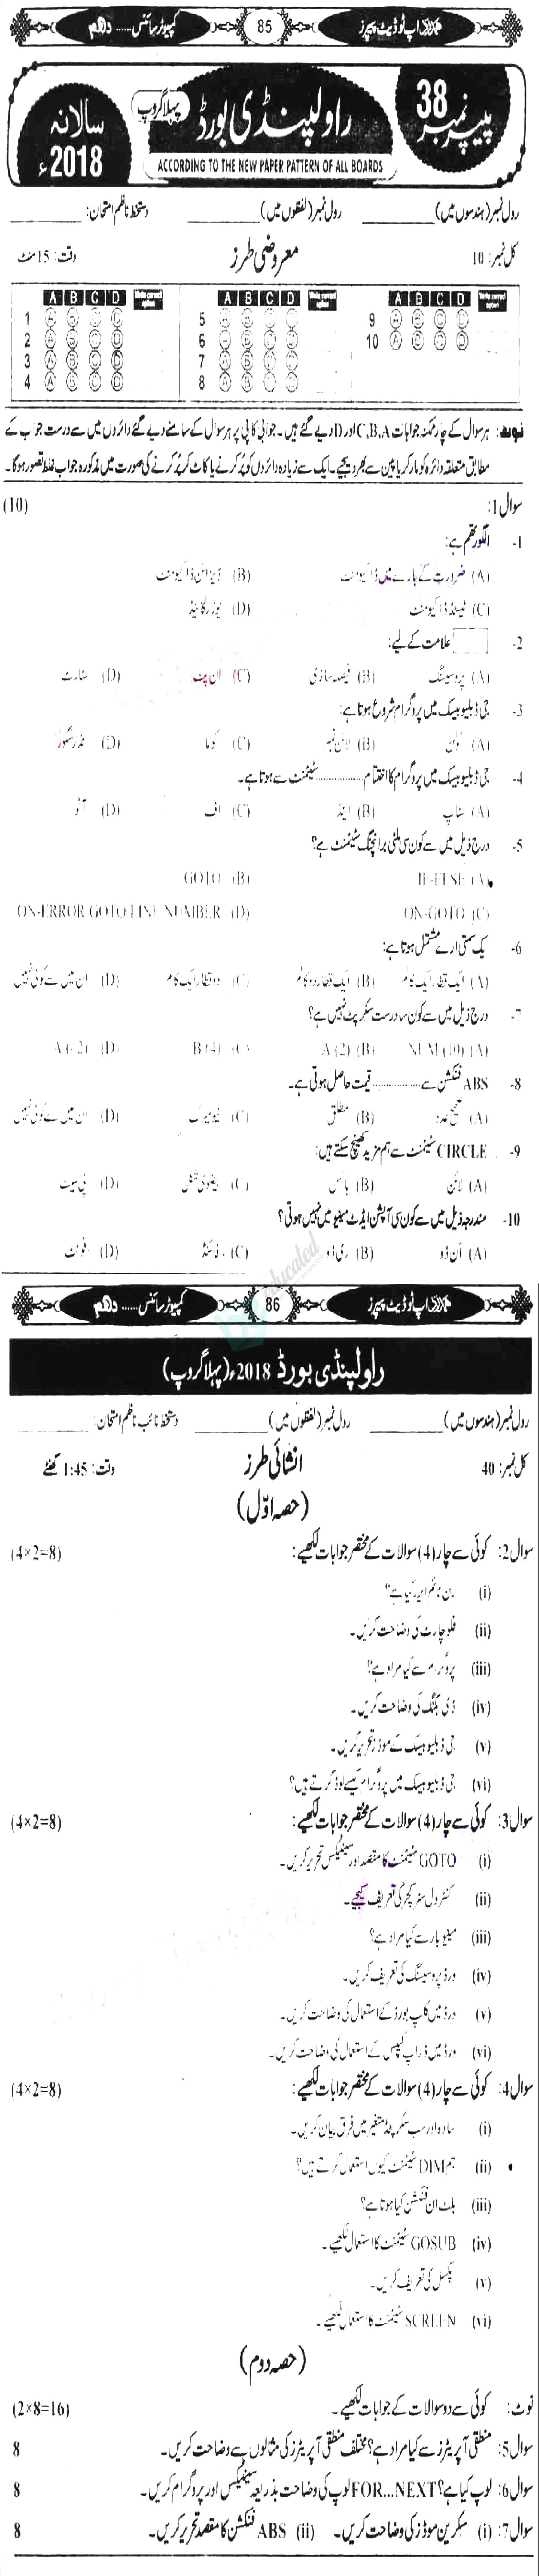 Computer Science 10th class Past Paper Group 1 BISE Rawalpindi 2018